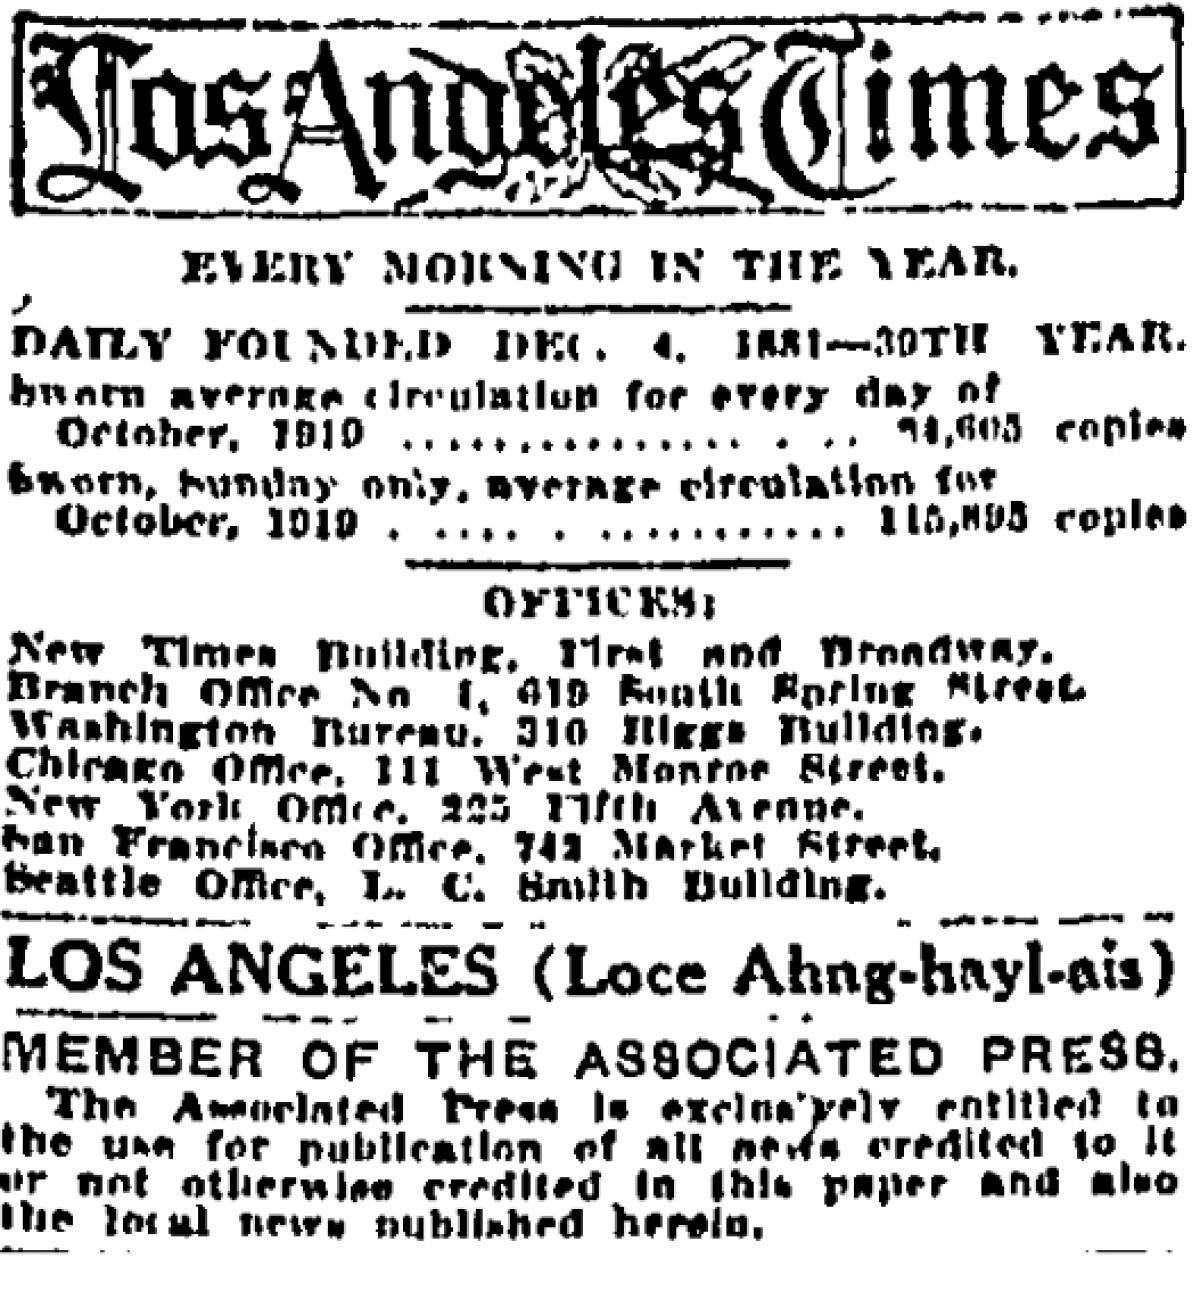 The L.A. Times masthead from Jan. 1, 1920, includes a guide to how to pronounce Los Angeles: "Loce Ahng-hayl-ais."